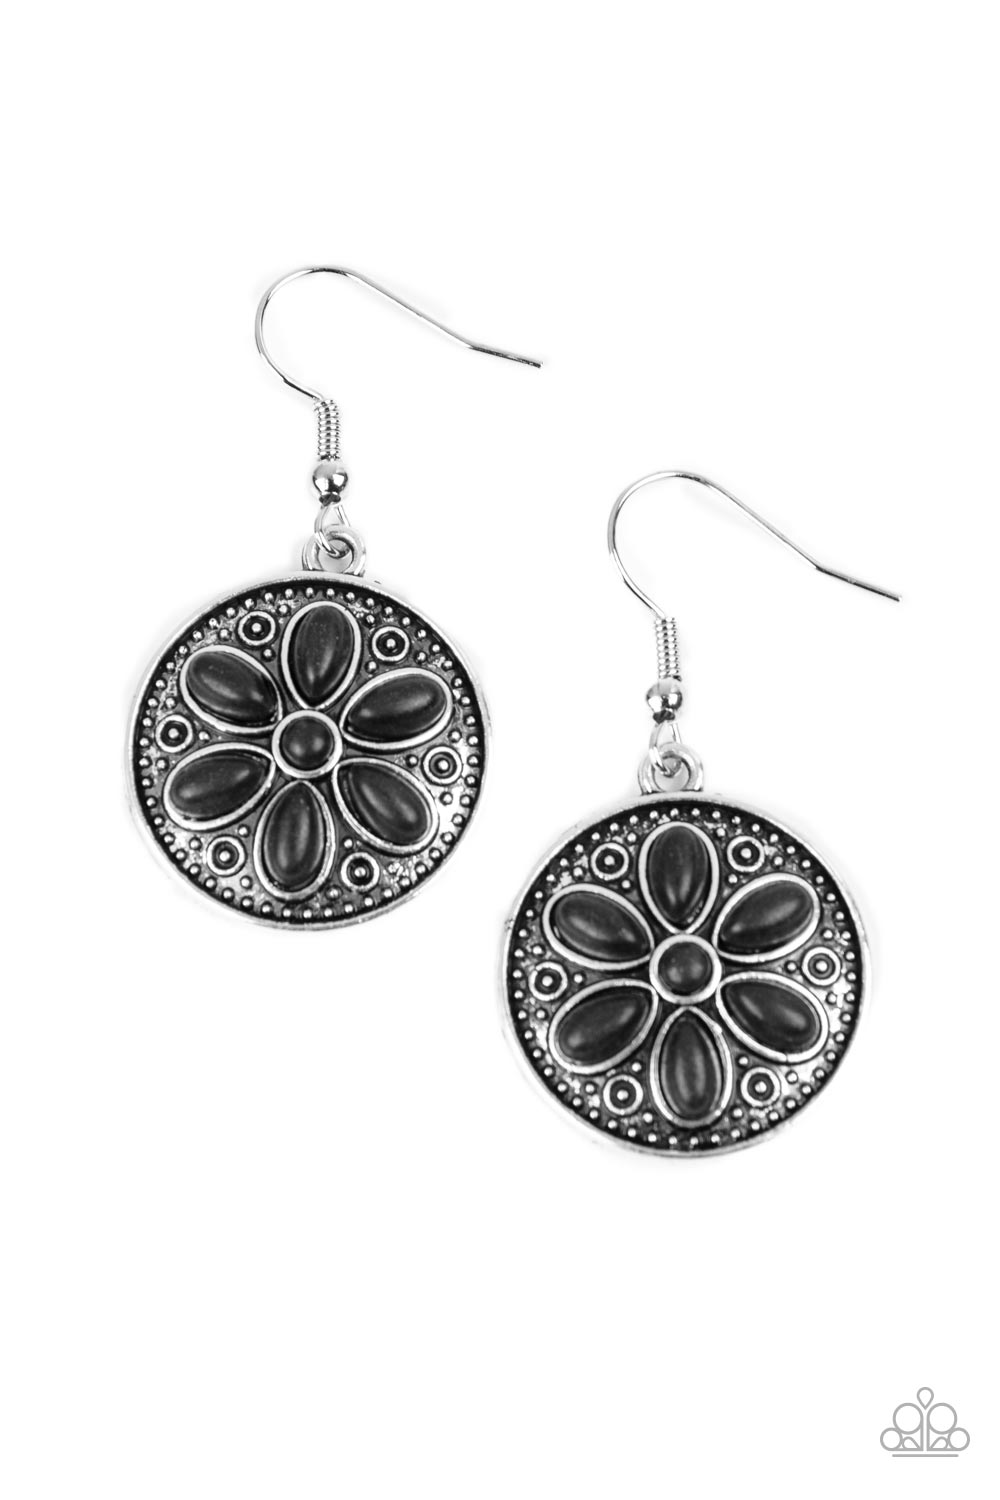 Saguaro Spring - Black Stone and Silver Earrings - Paparazzi Accessories - Earthy black stones are pressed into the front of a studded silver frame, blooming into a rustic daisy for a seasonal look. Earring attaches to a standard fishhook fitting. Sold as one pair of earrings.